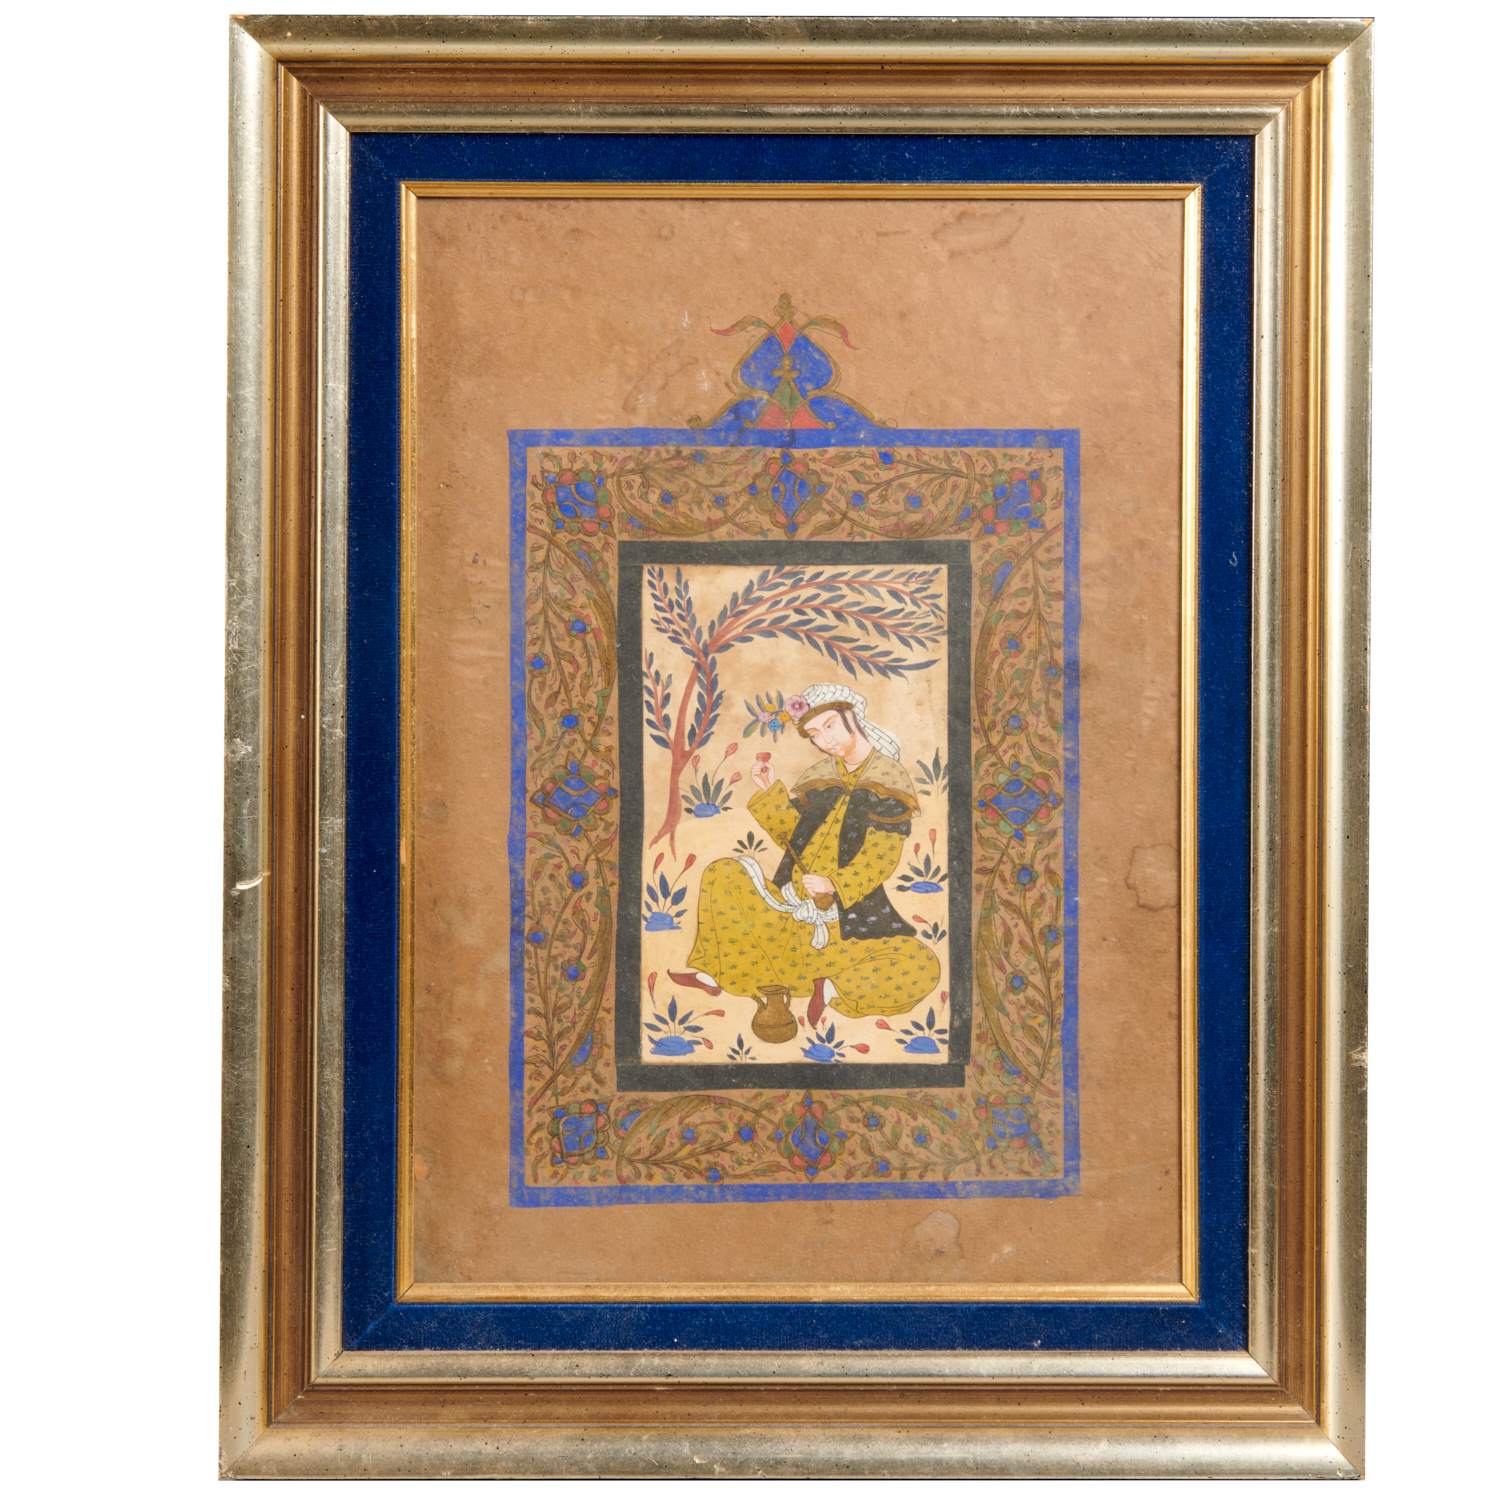 MUGHAL SCHOOL WATERCOLOR AND GOLD 2cdf51